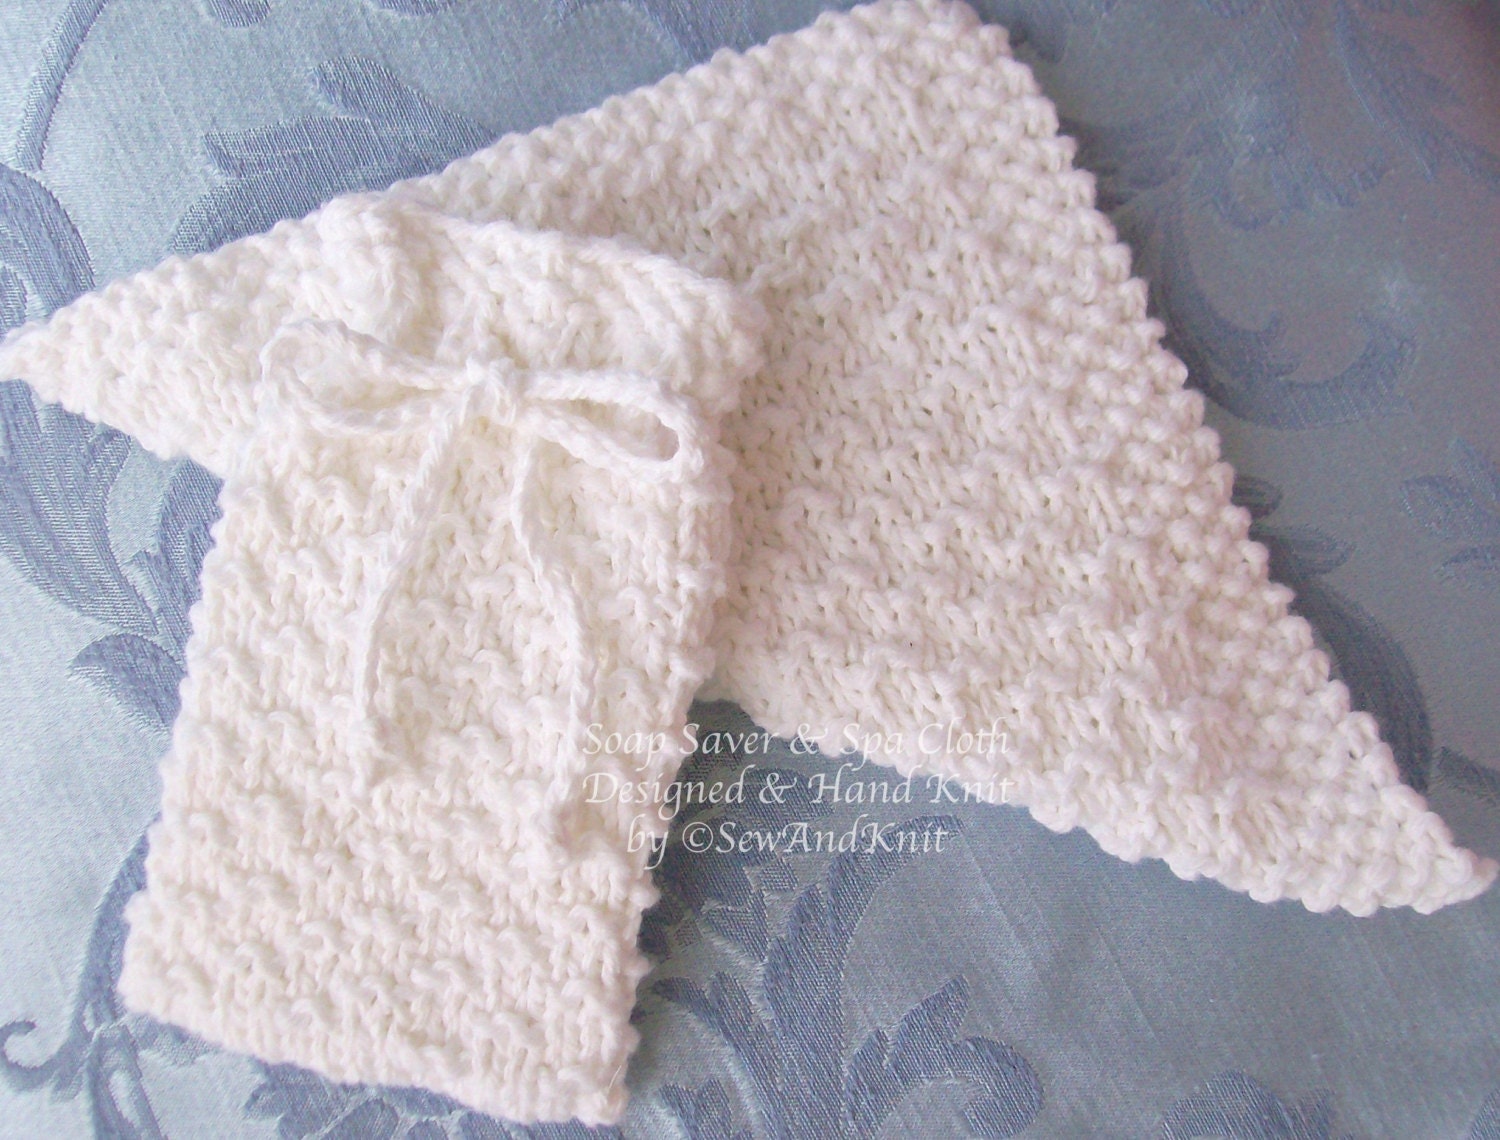 Wash Cloth & Soap Bag Hand Knit Soap Saver with Matching